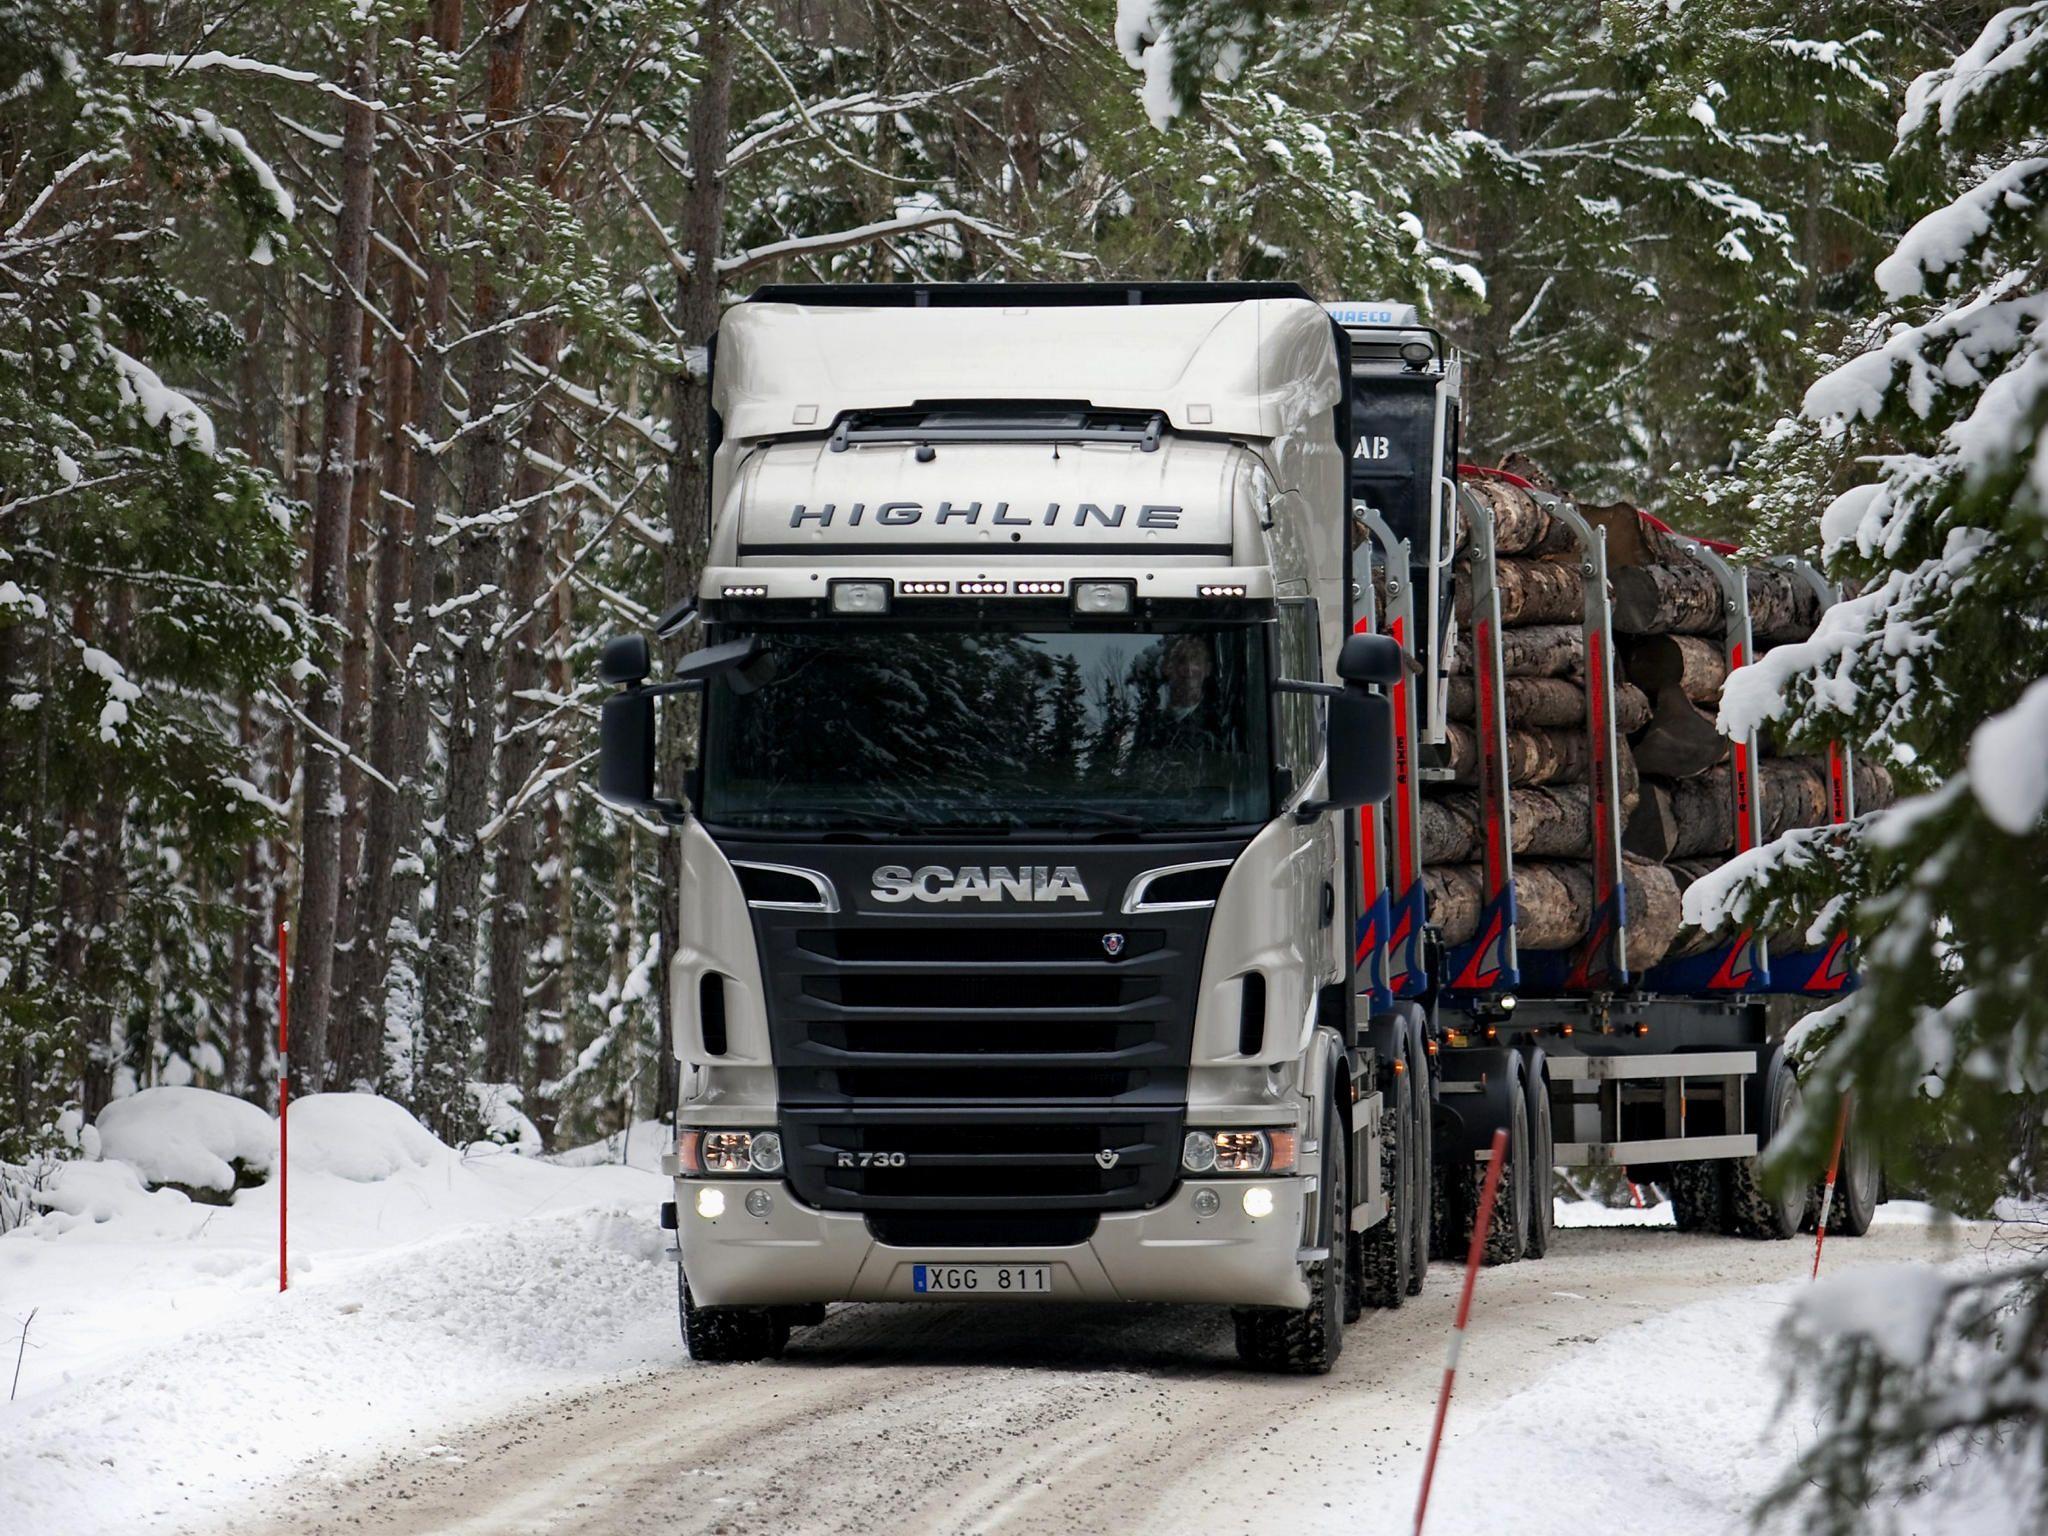 Scania Truck Wallpaper. Iwan Collection&;s